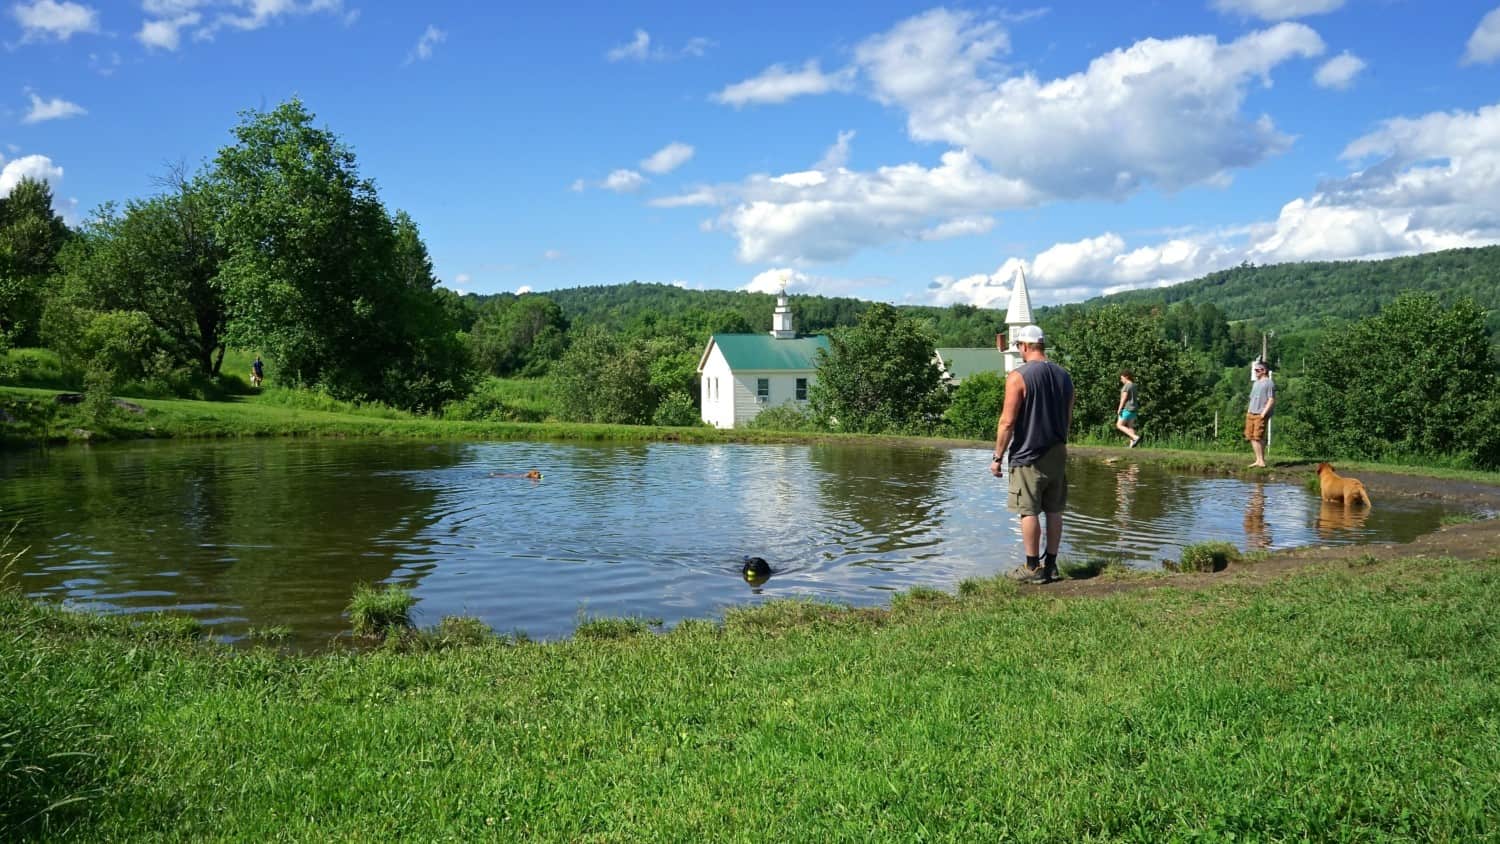 Vermont's Top Pet Friendly Attraction: Dog Mountain | GoPetFriendly.com